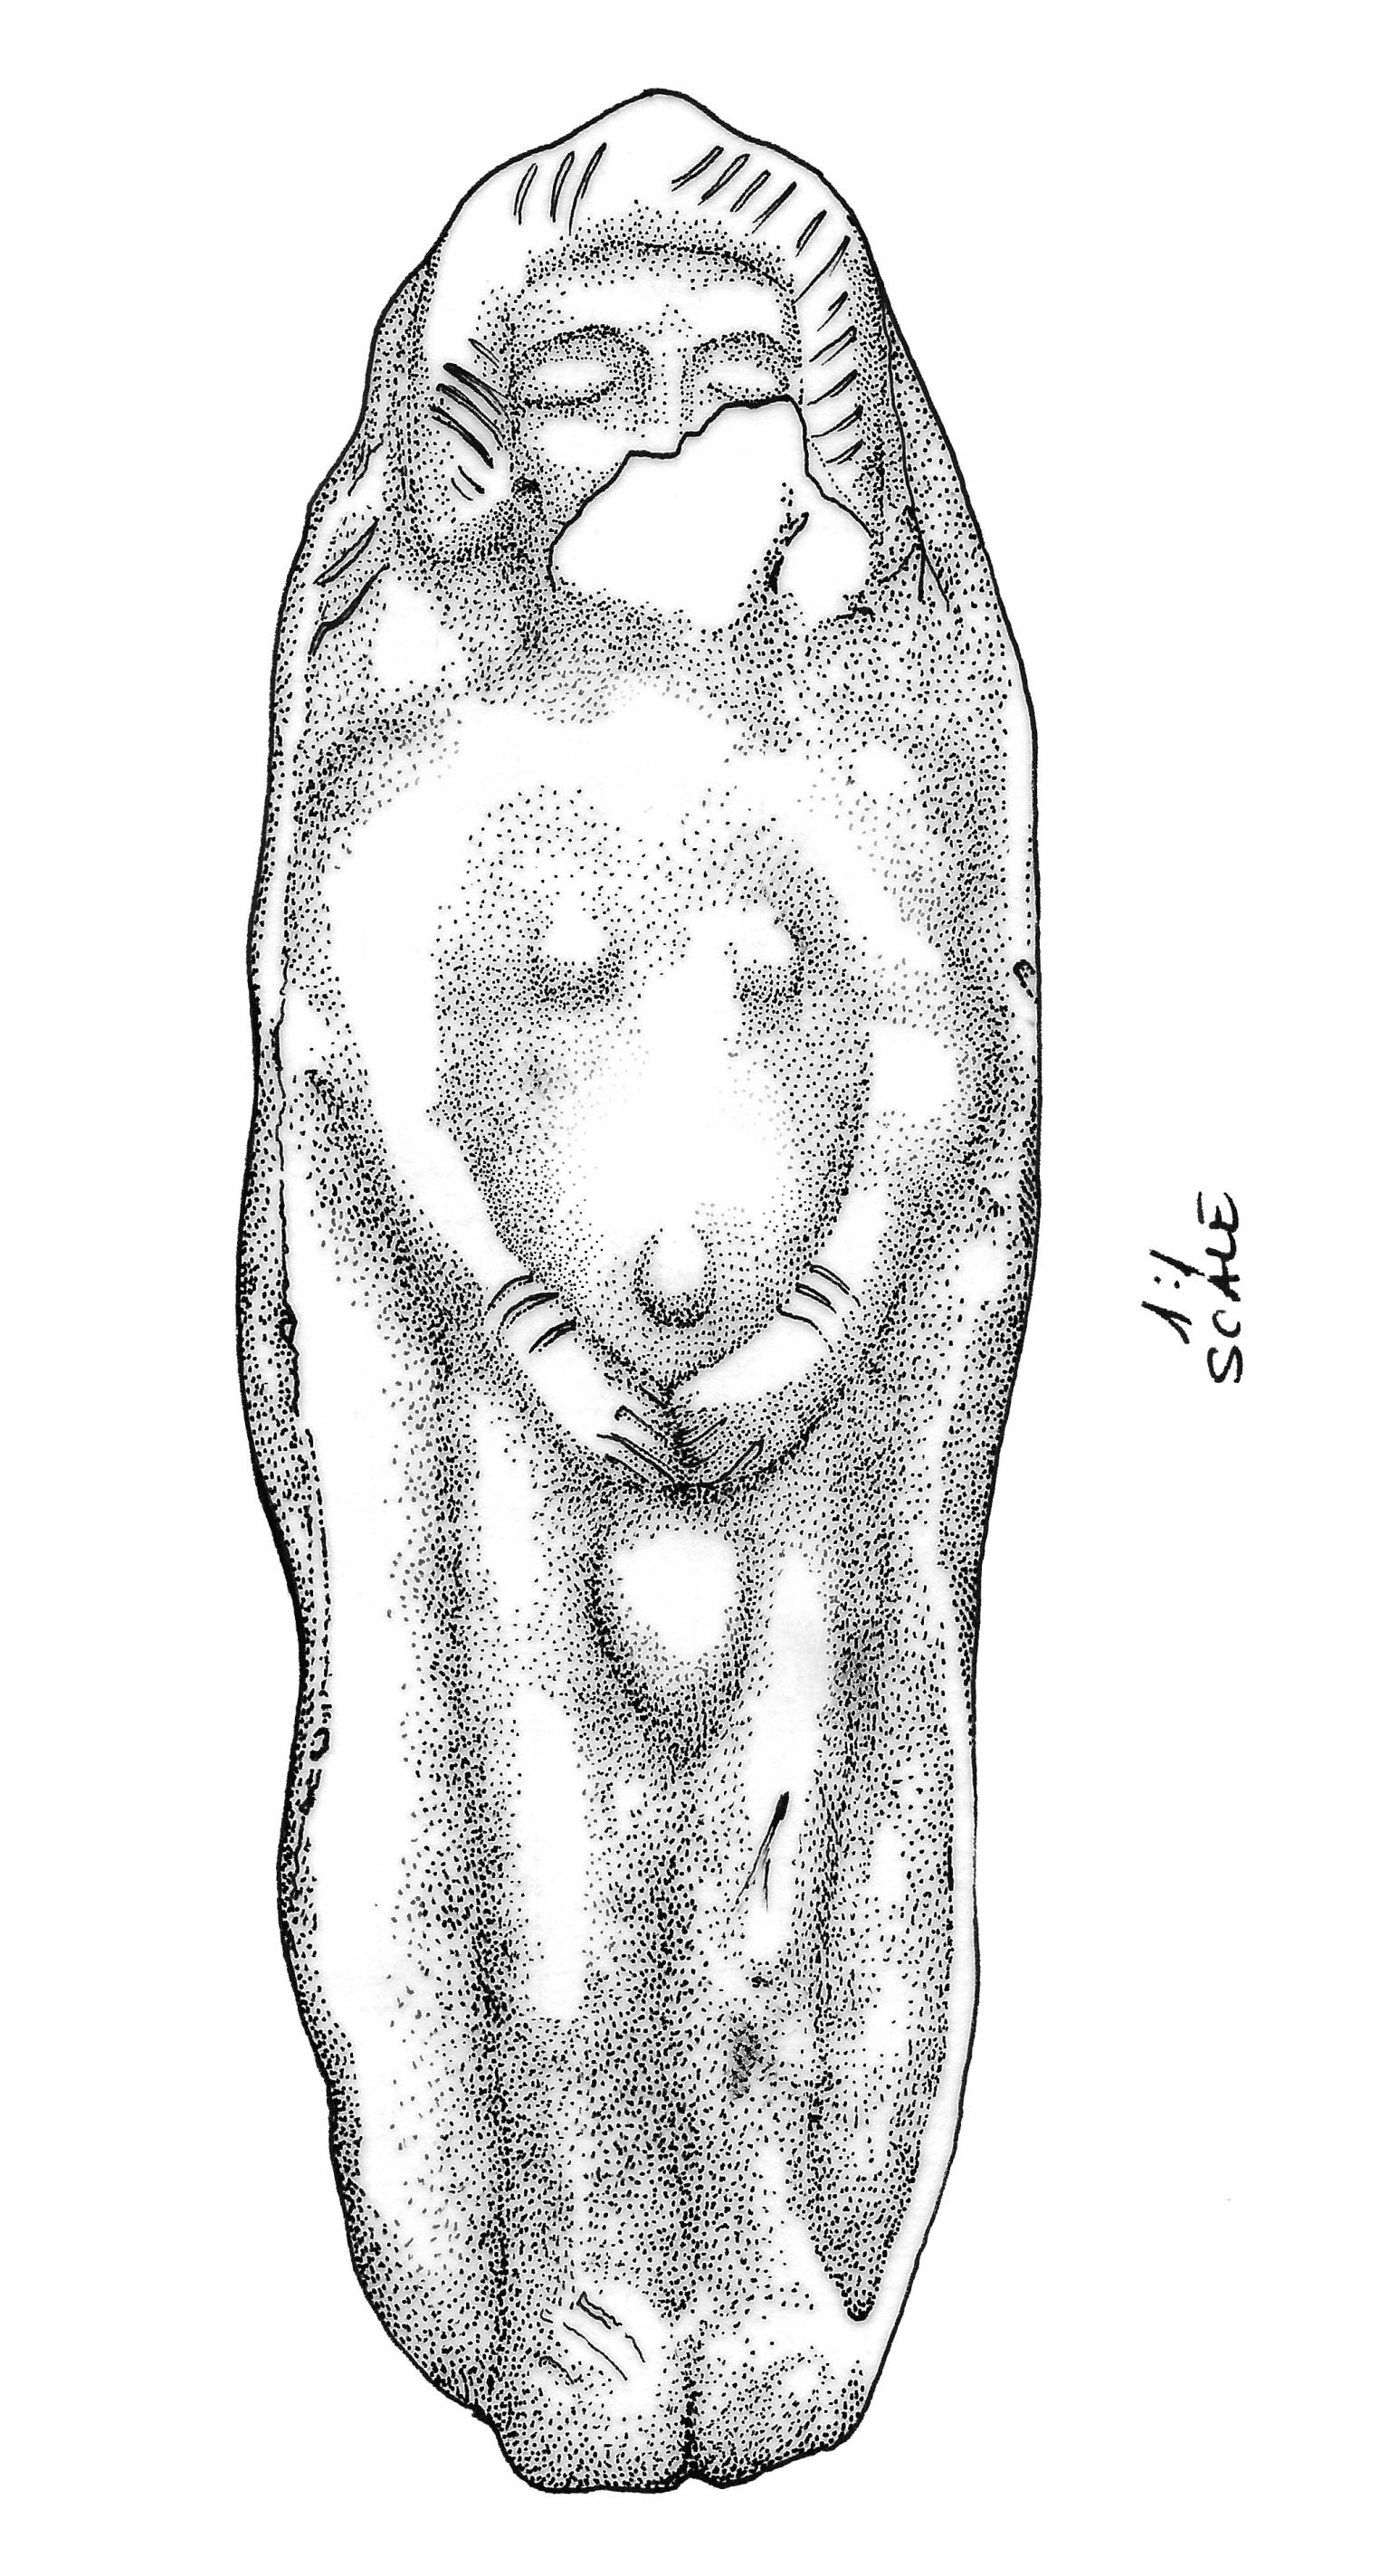 Frontal view drawing of figurine of pregnant woman cradling belly.